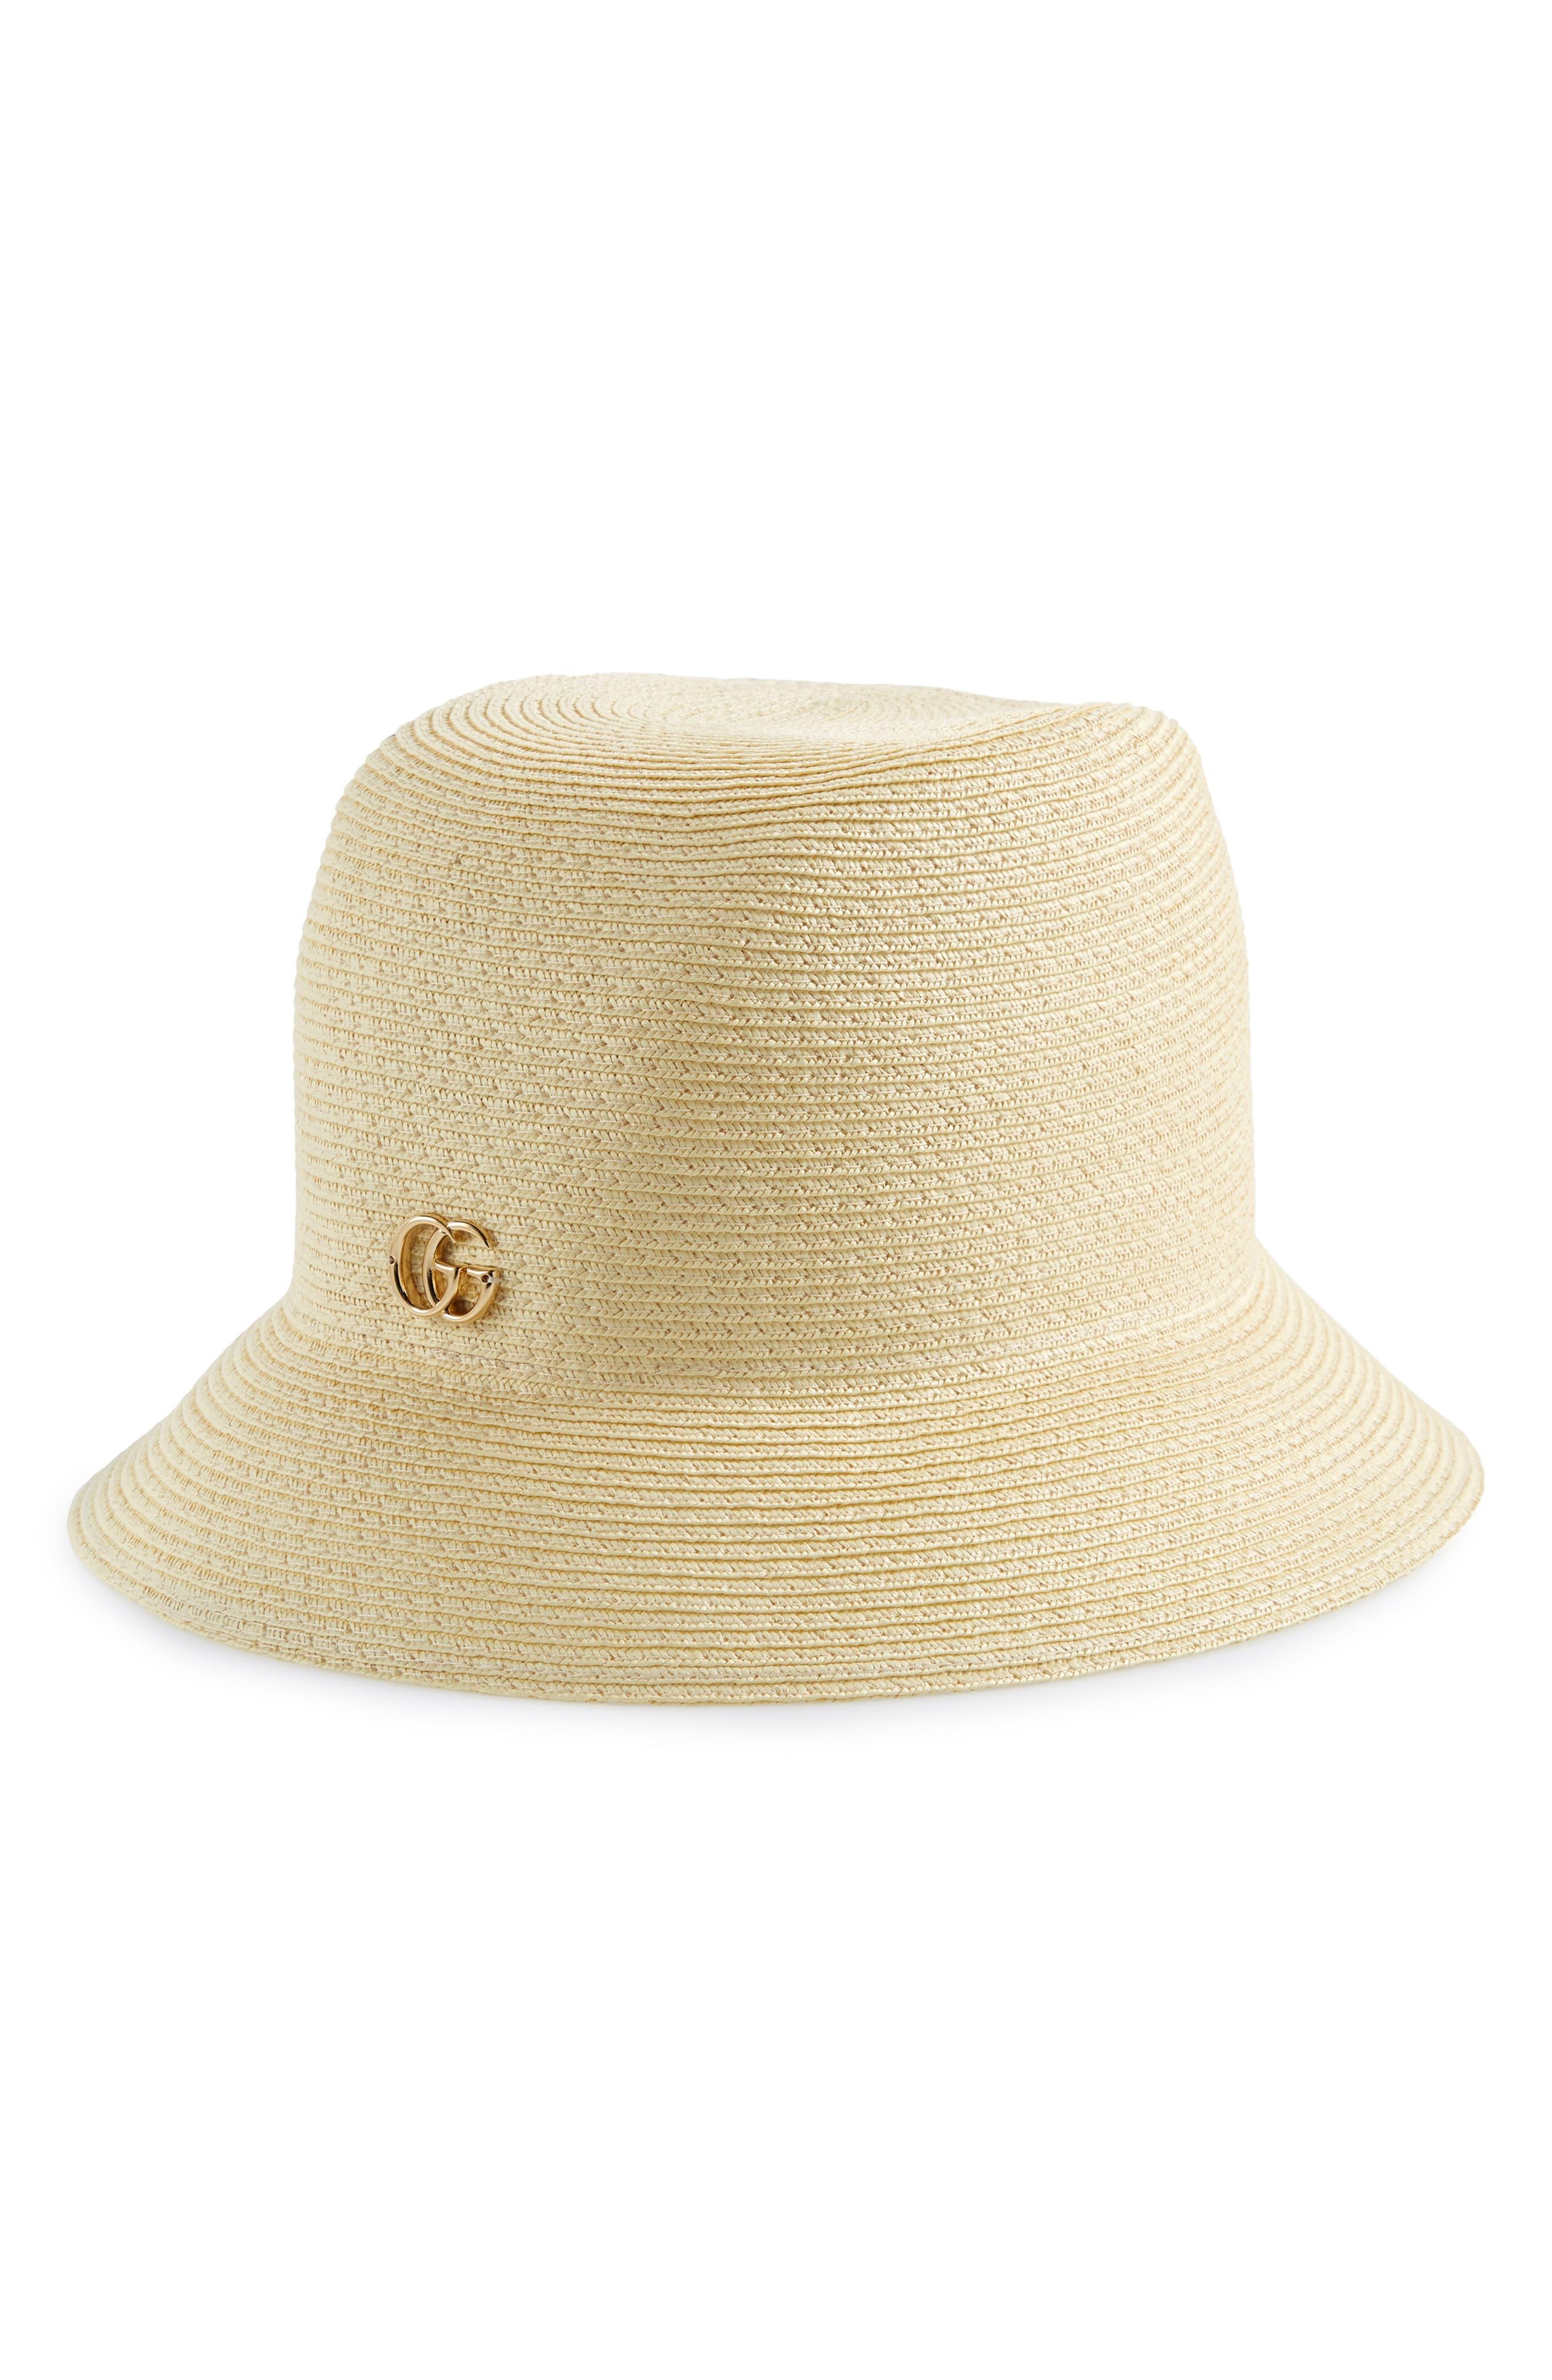 Gucci Straw Bucket Hat - in Natural - Lyst